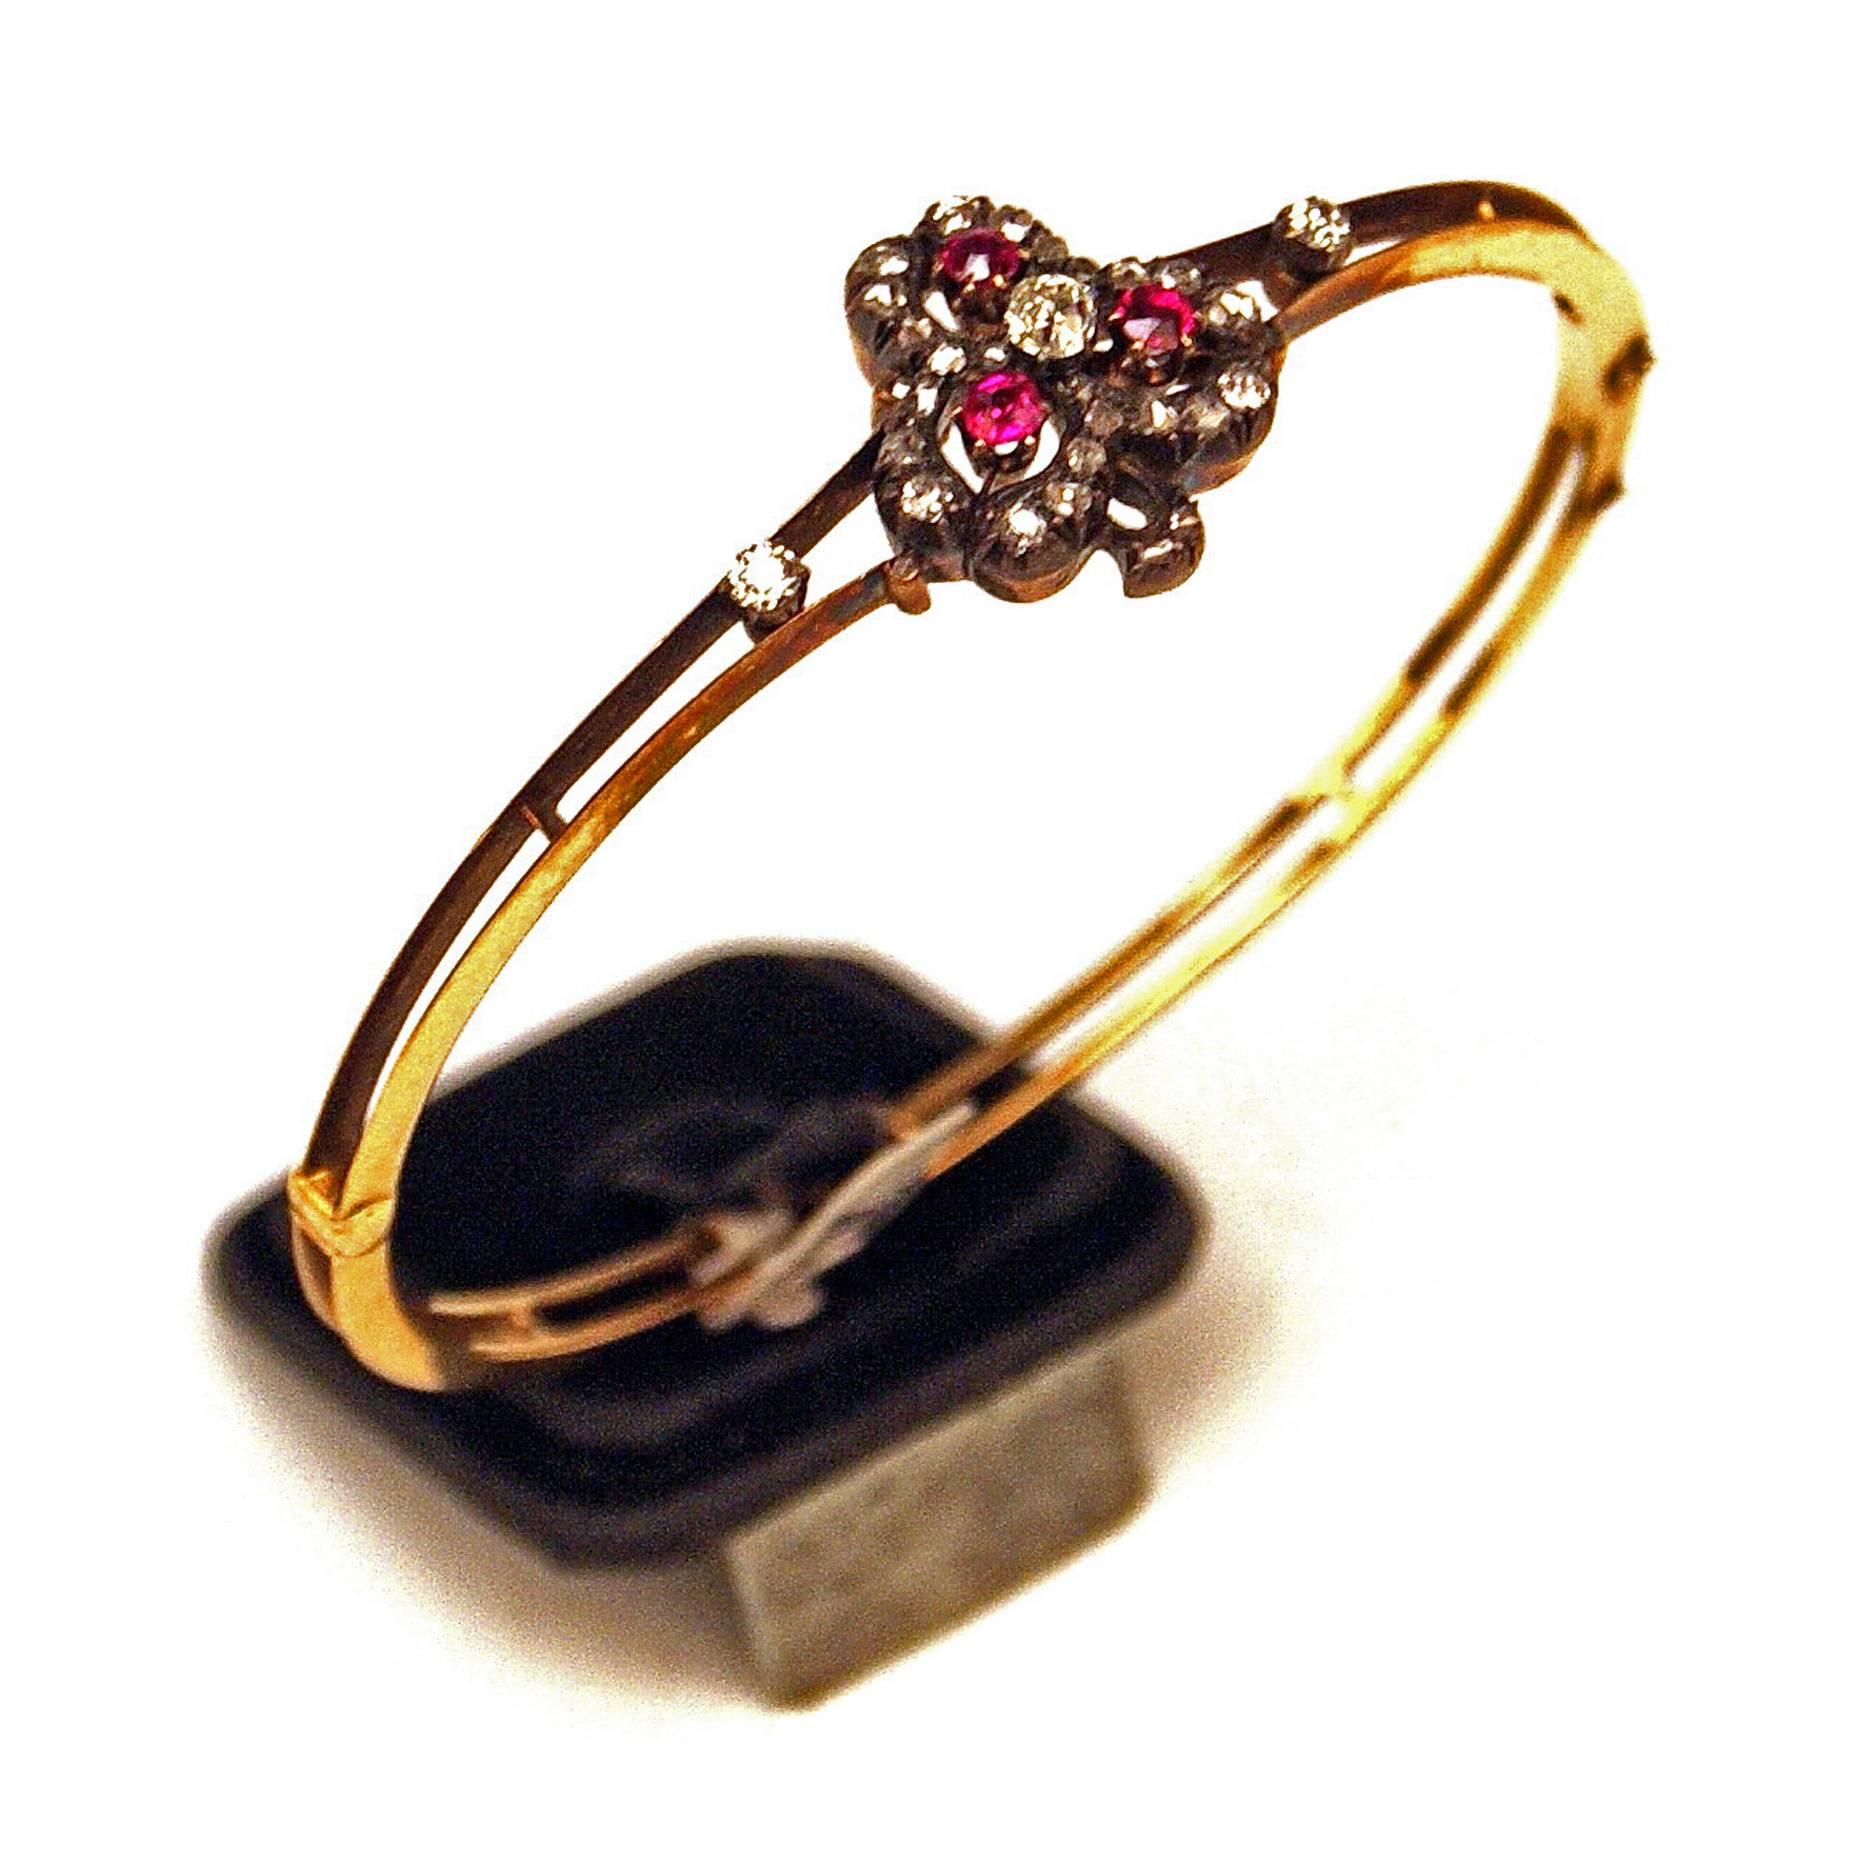 STUNNING ART NOUVEAU VIENNESE (AUSTRIAN) GOLDEN BANGLE / BRACELET, COVERED WITH:
1)  MANY OLD-CUT BRILLIANTS HAVING WEIGHT OF 1.10 CARATS IN TOTAL
2)  THREE EXCELLENTLY CUT RUBIES

This bangle is stunningly decorated with mentioned valuable